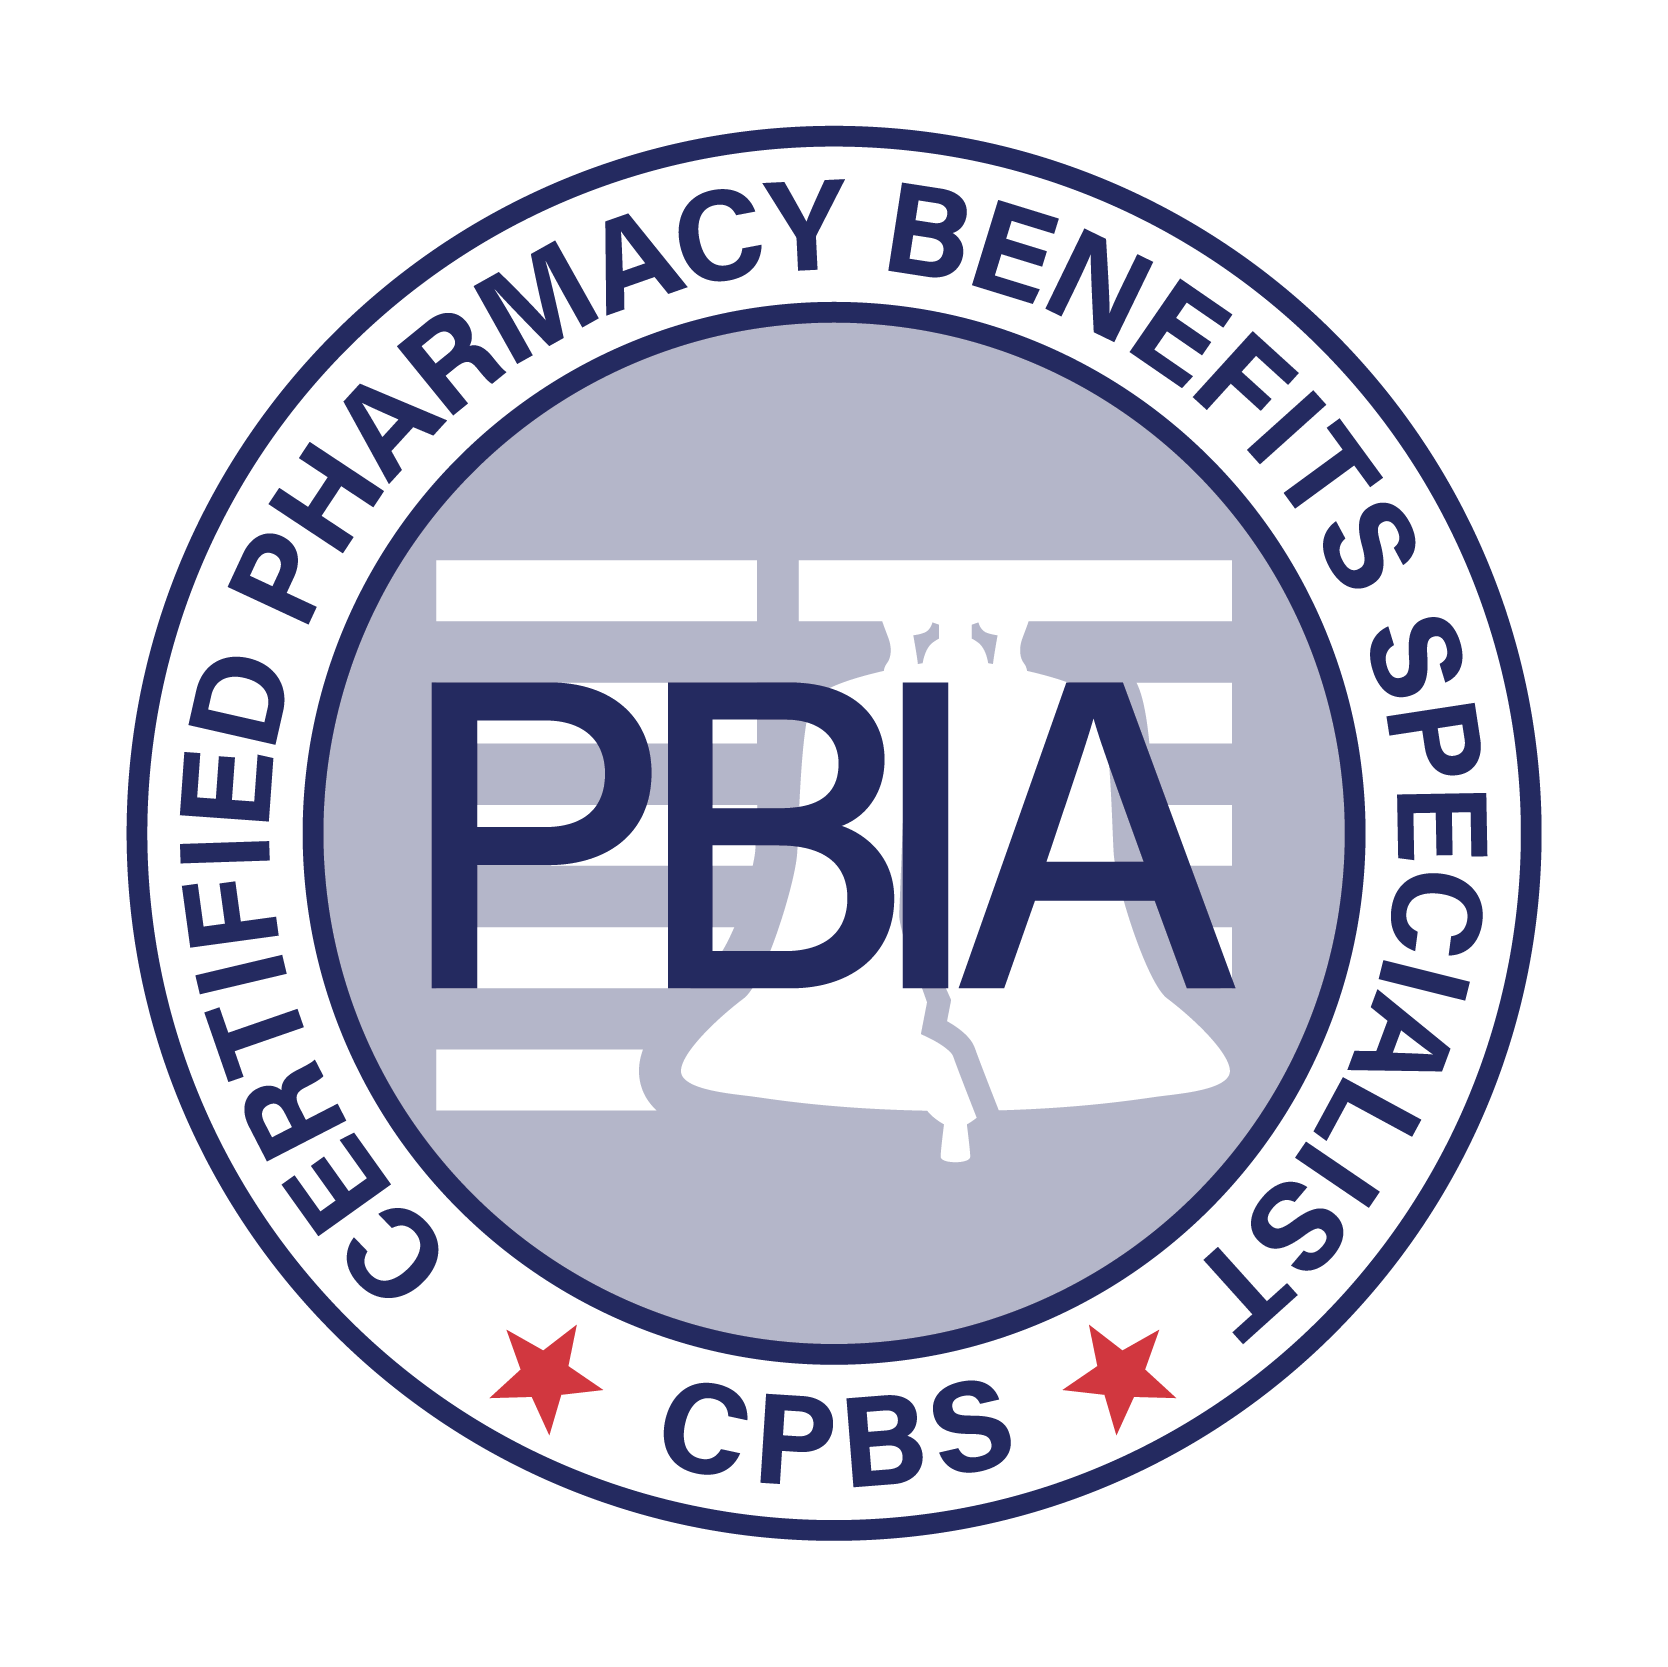 Certified Pharmacy Benefits Specialist (CPBS)